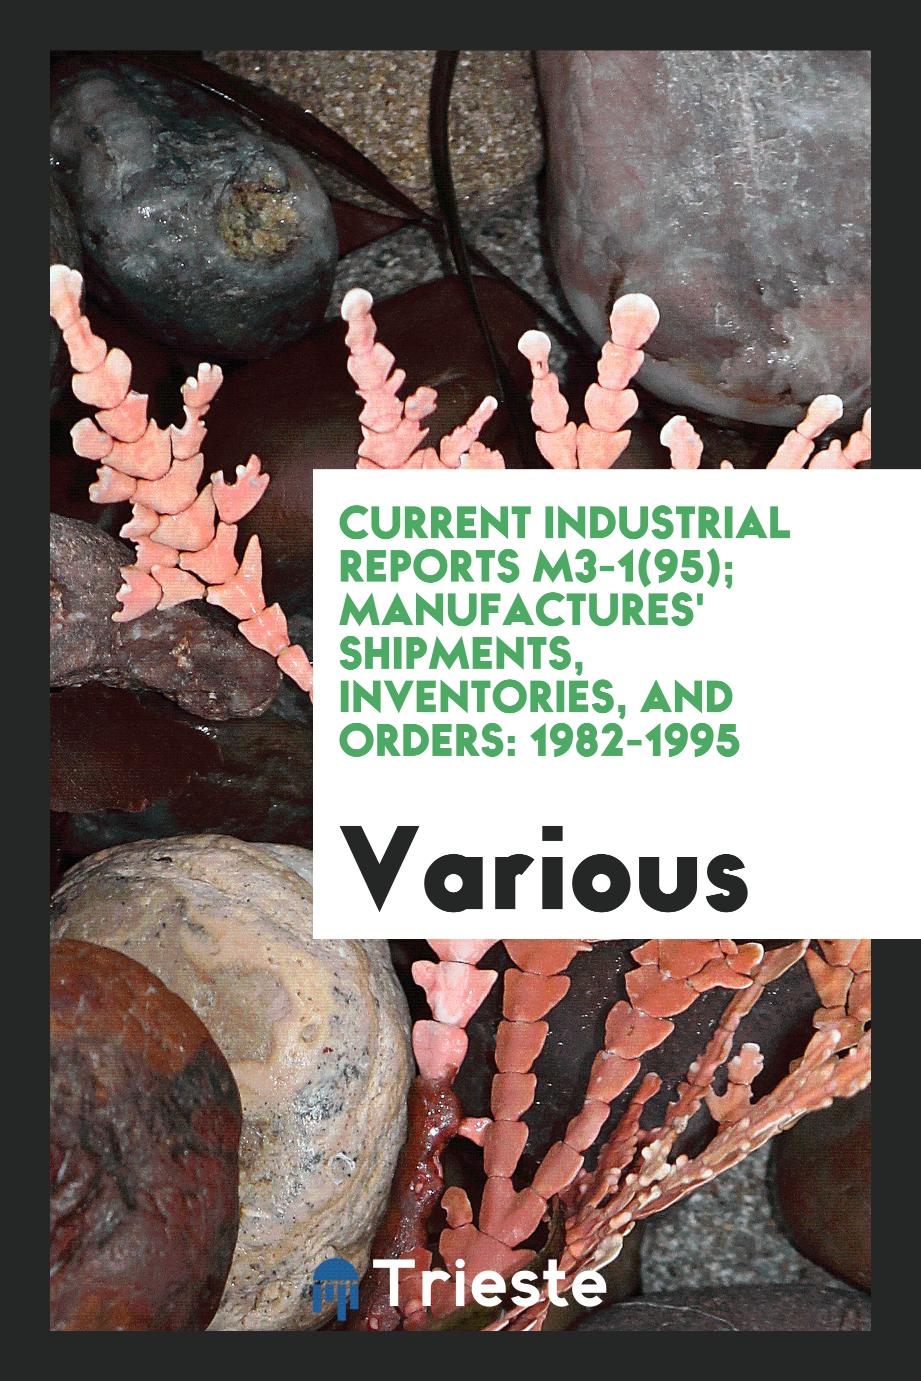 Current industrial reports M3-1(95); Manufactures' Shipments, Inventories, and orders: 1982-1995